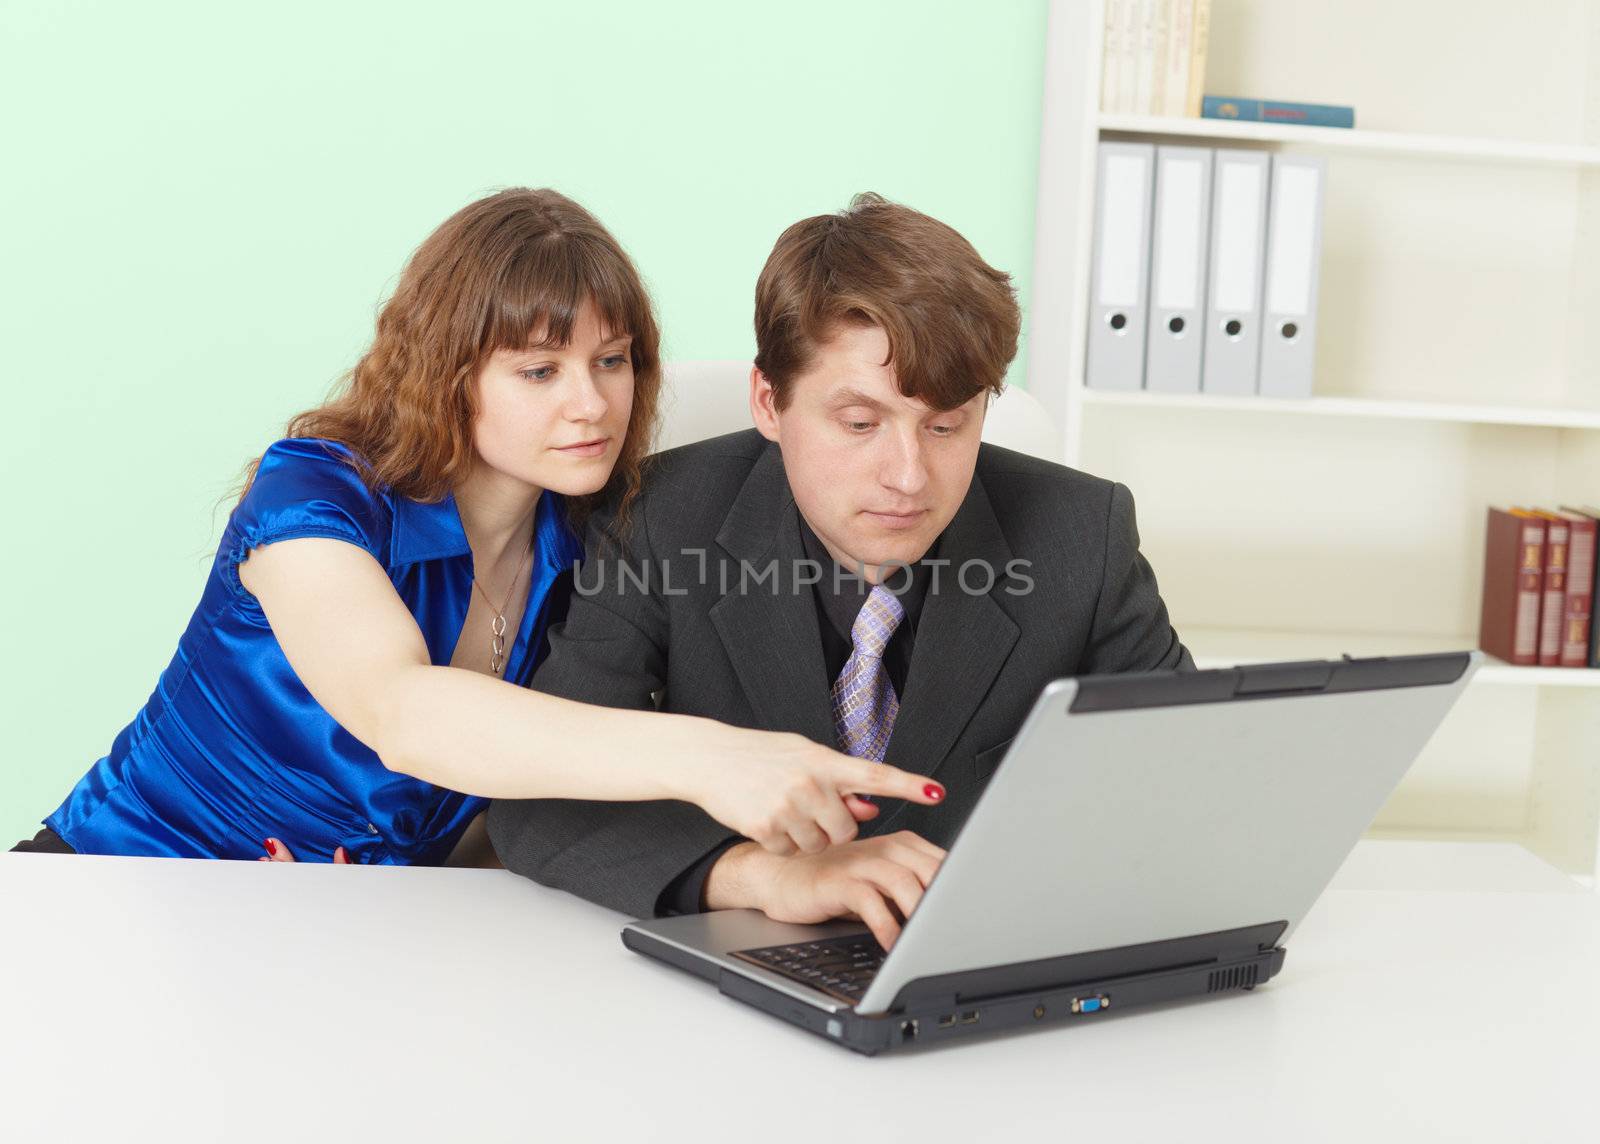 Young people - a man and woman working in an office with computer